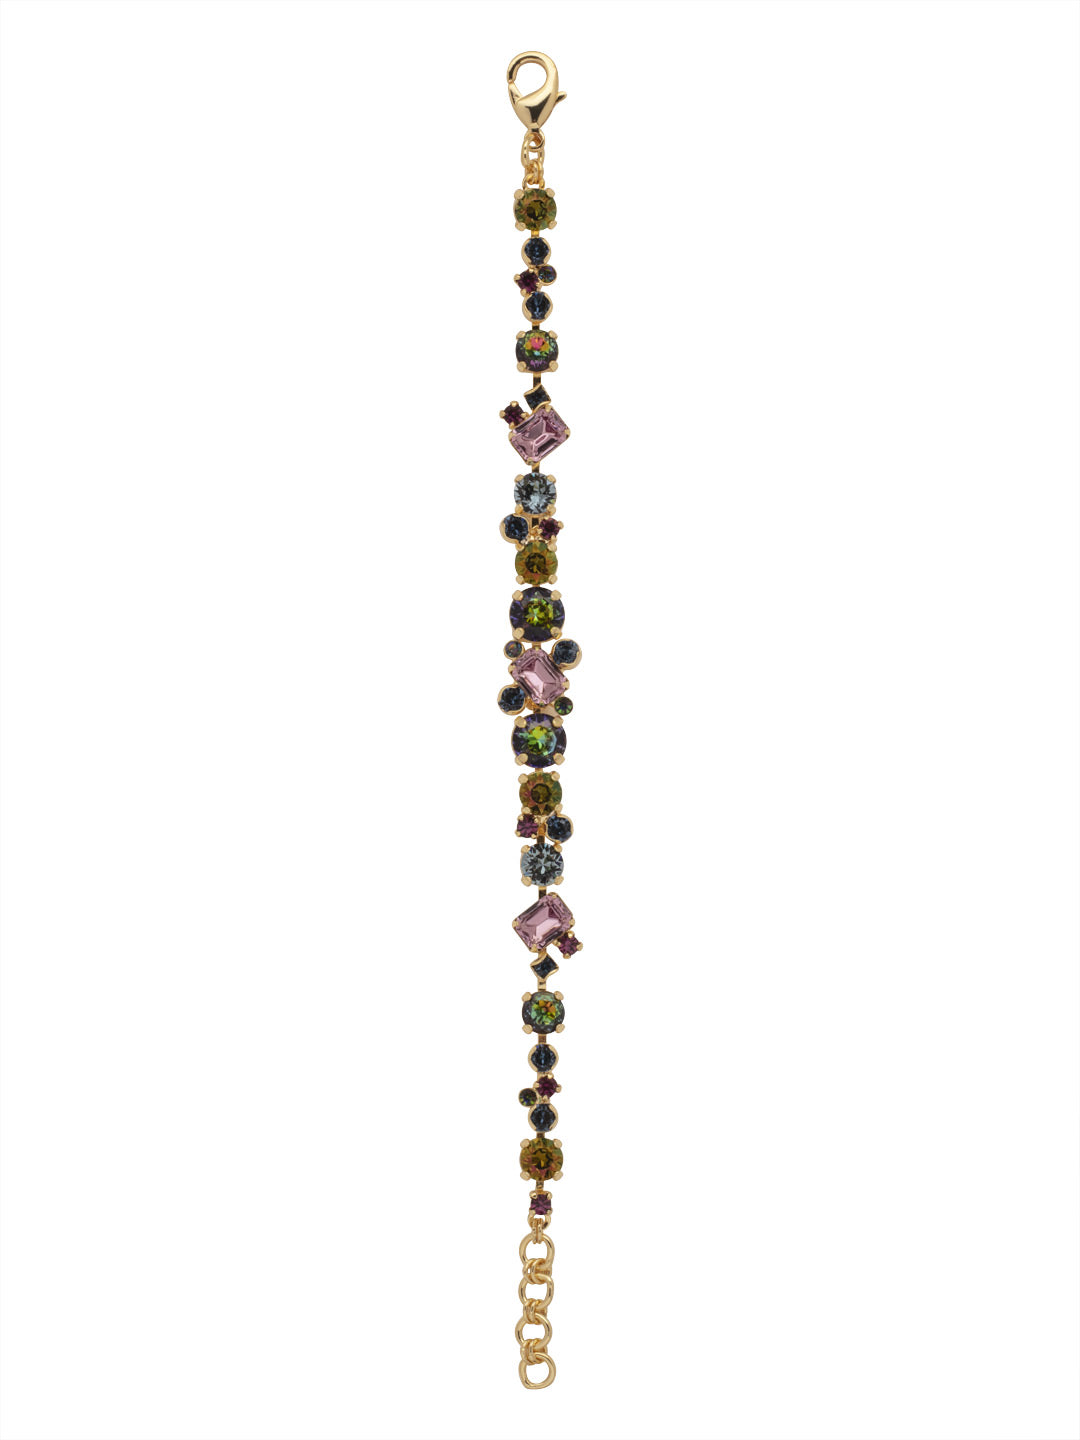 Geo Classic Tennis Bracelet - BDG46BGROP - <p>Delicate round crystals mix with emerald cut crystals for a classic and elegant look. From Sorrelli's Royal Plum collection in our Bright Gold-tone finish.</p>